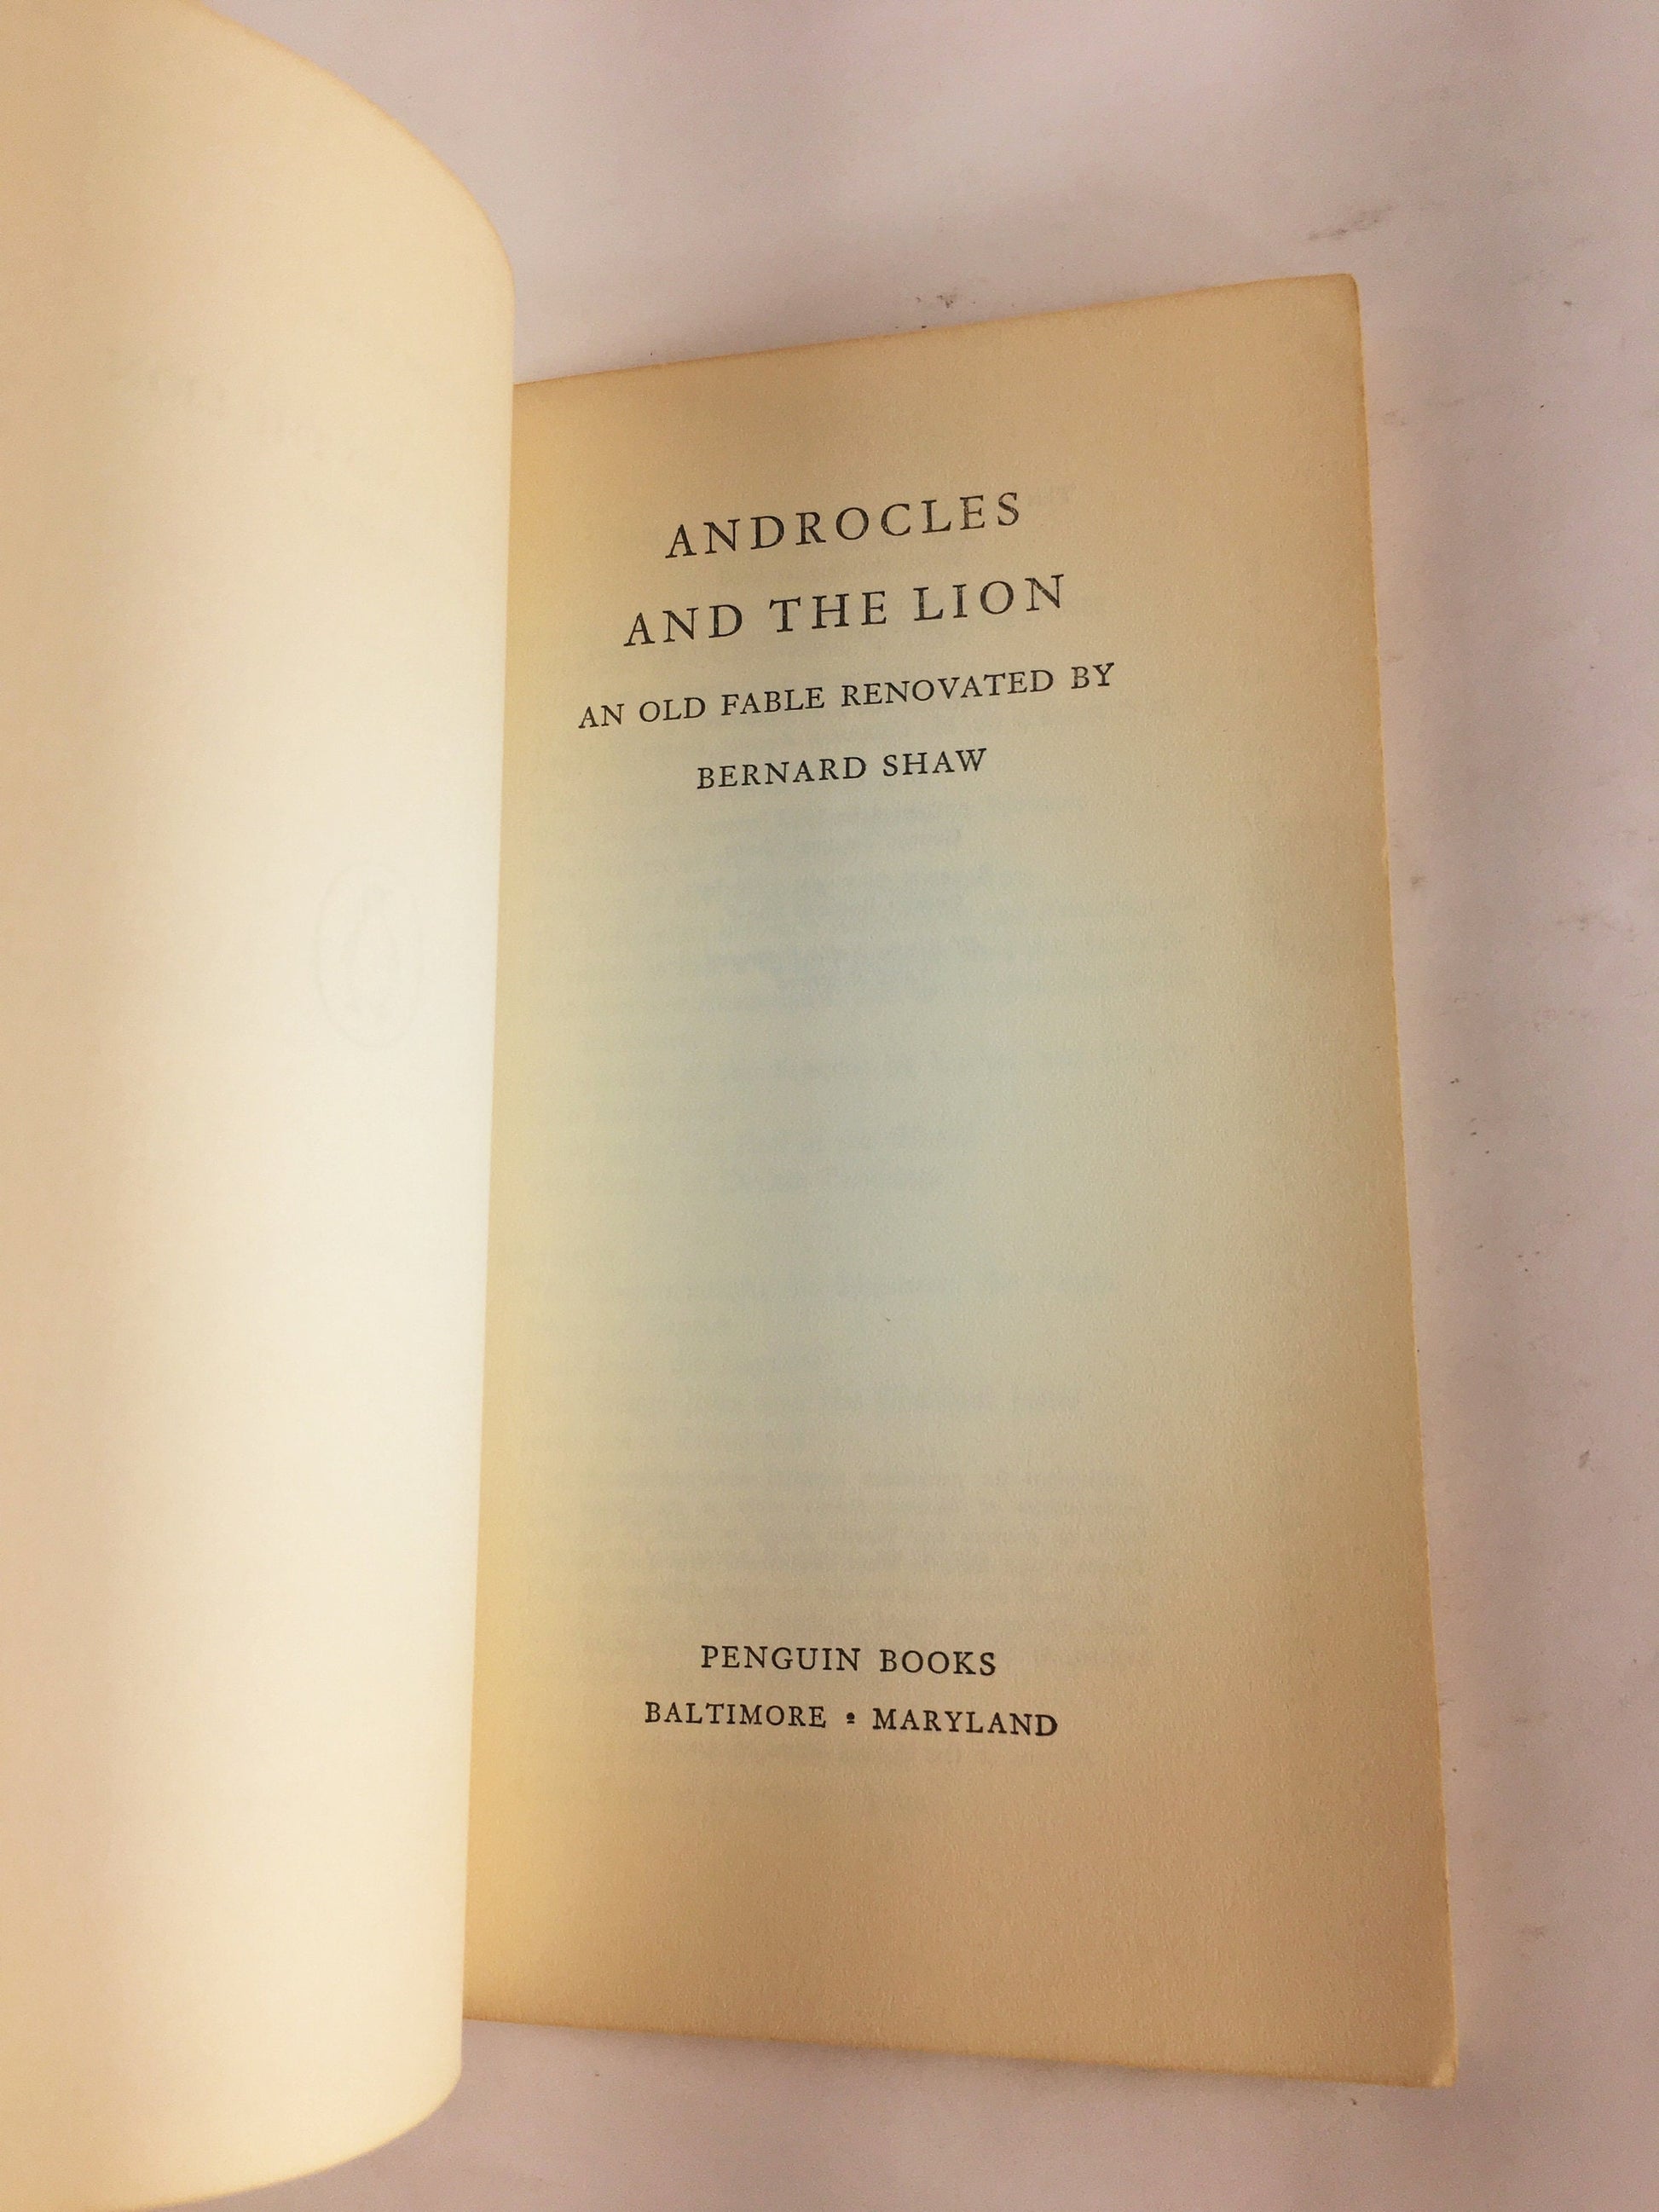 1960 George Bernard Shaw Androcles and the Lion. Vintage Penguin paperback book about Christians being led to the Colosseum for torture.